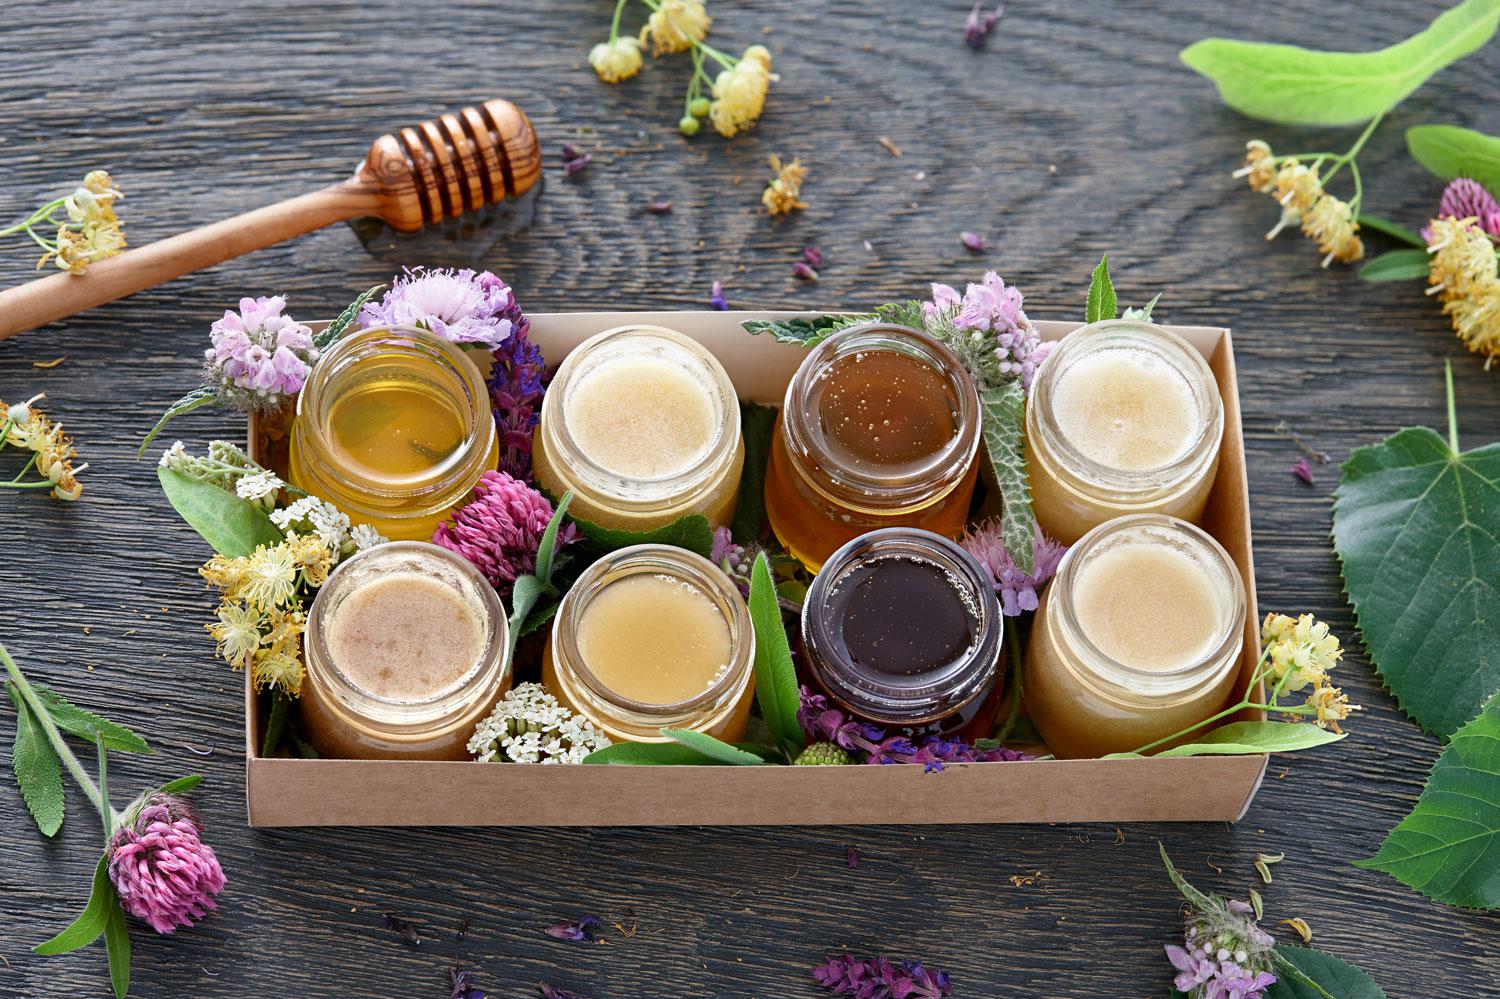 There are dozens of commercial names of honey, but there are only two basic types